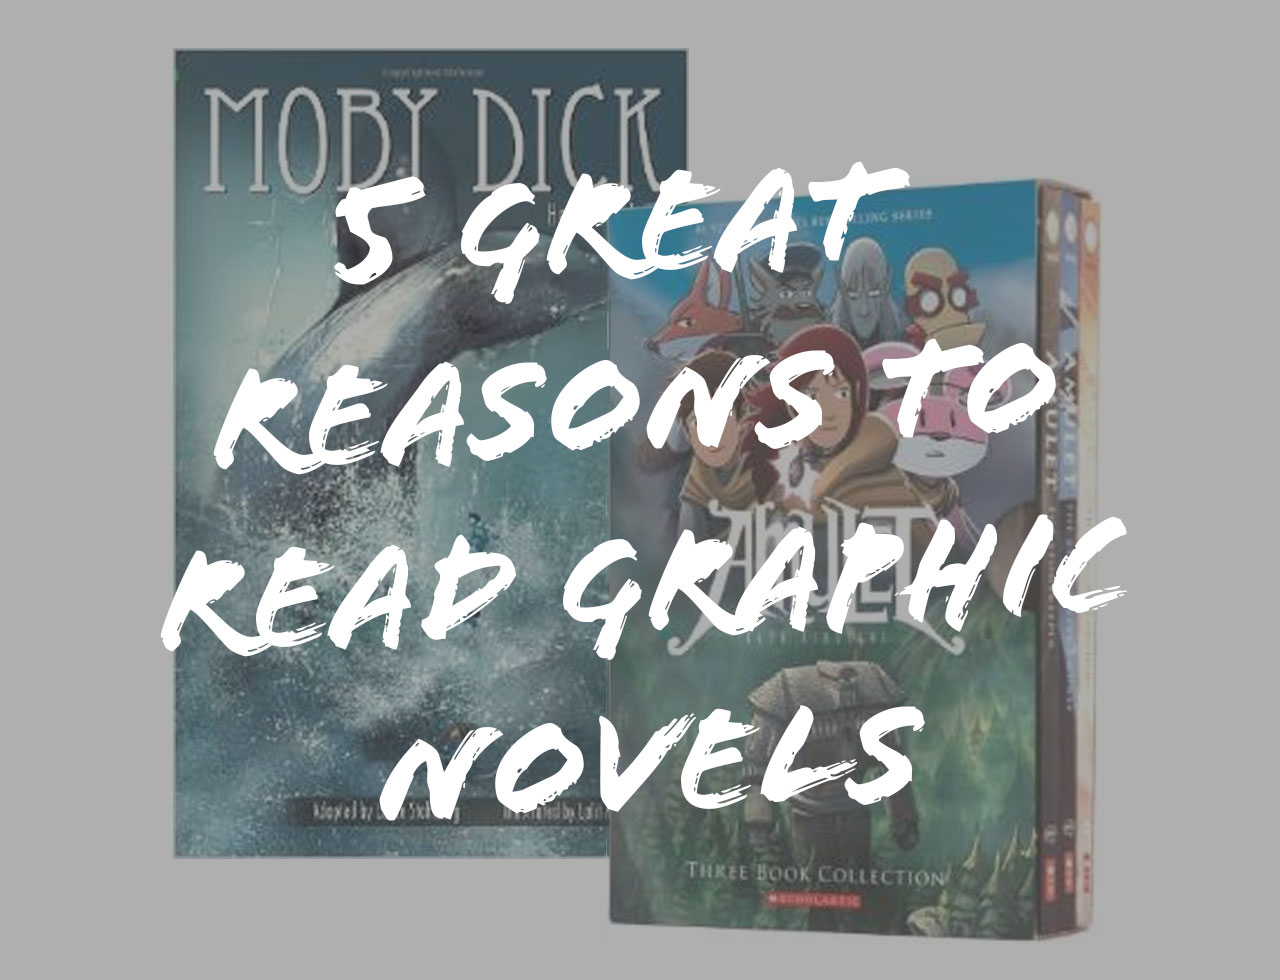 5 Great Reasons to Read Graphic Novels